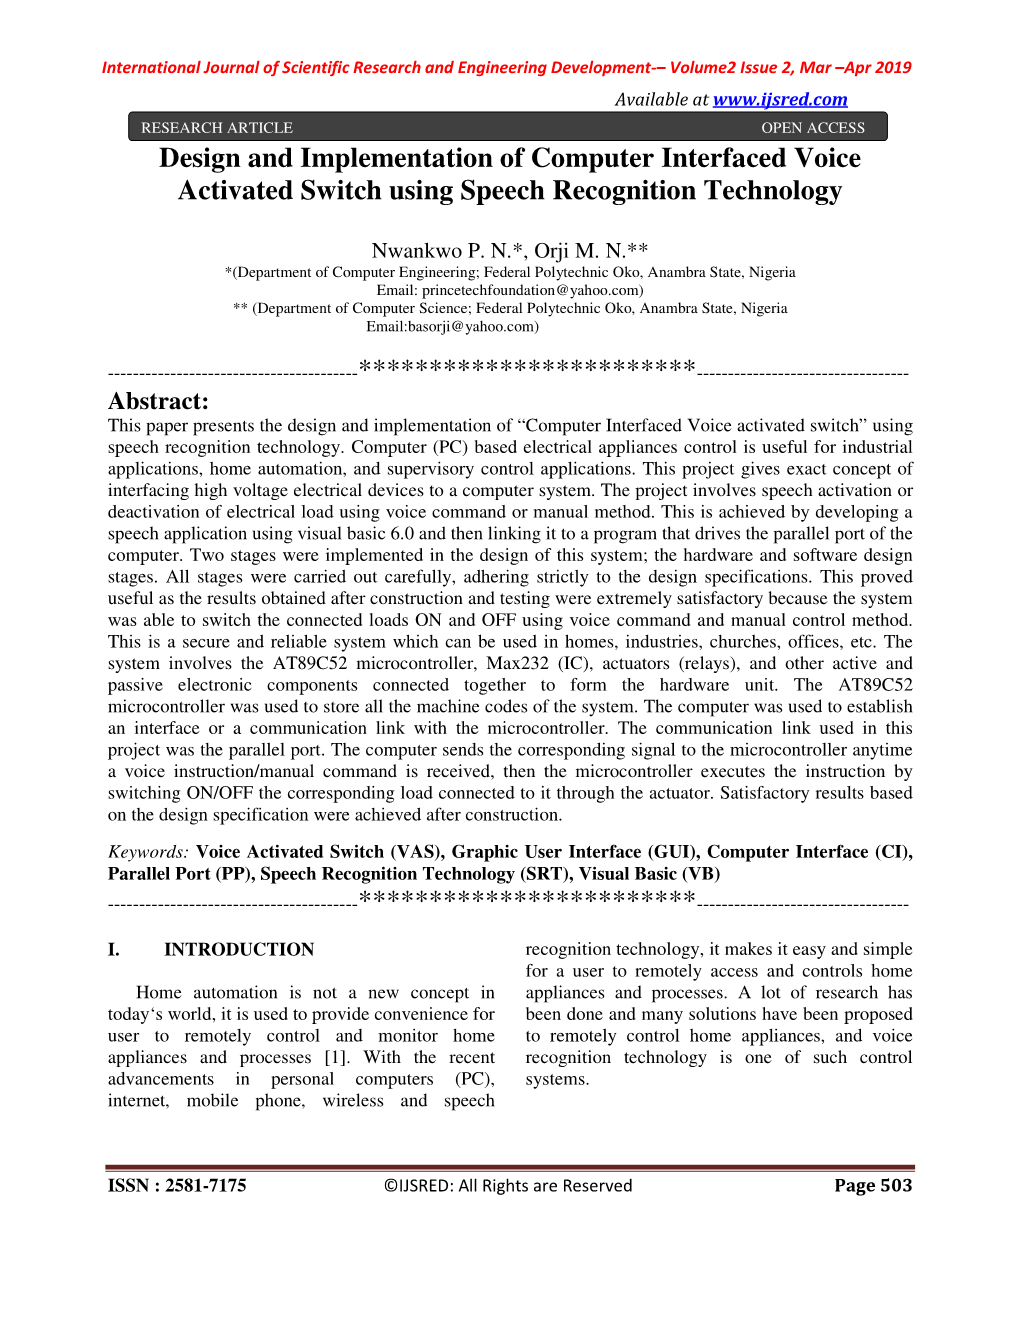 Design and Implementation of Computer Interfaced Voice Activated Switch Using Speech Recognition Technology